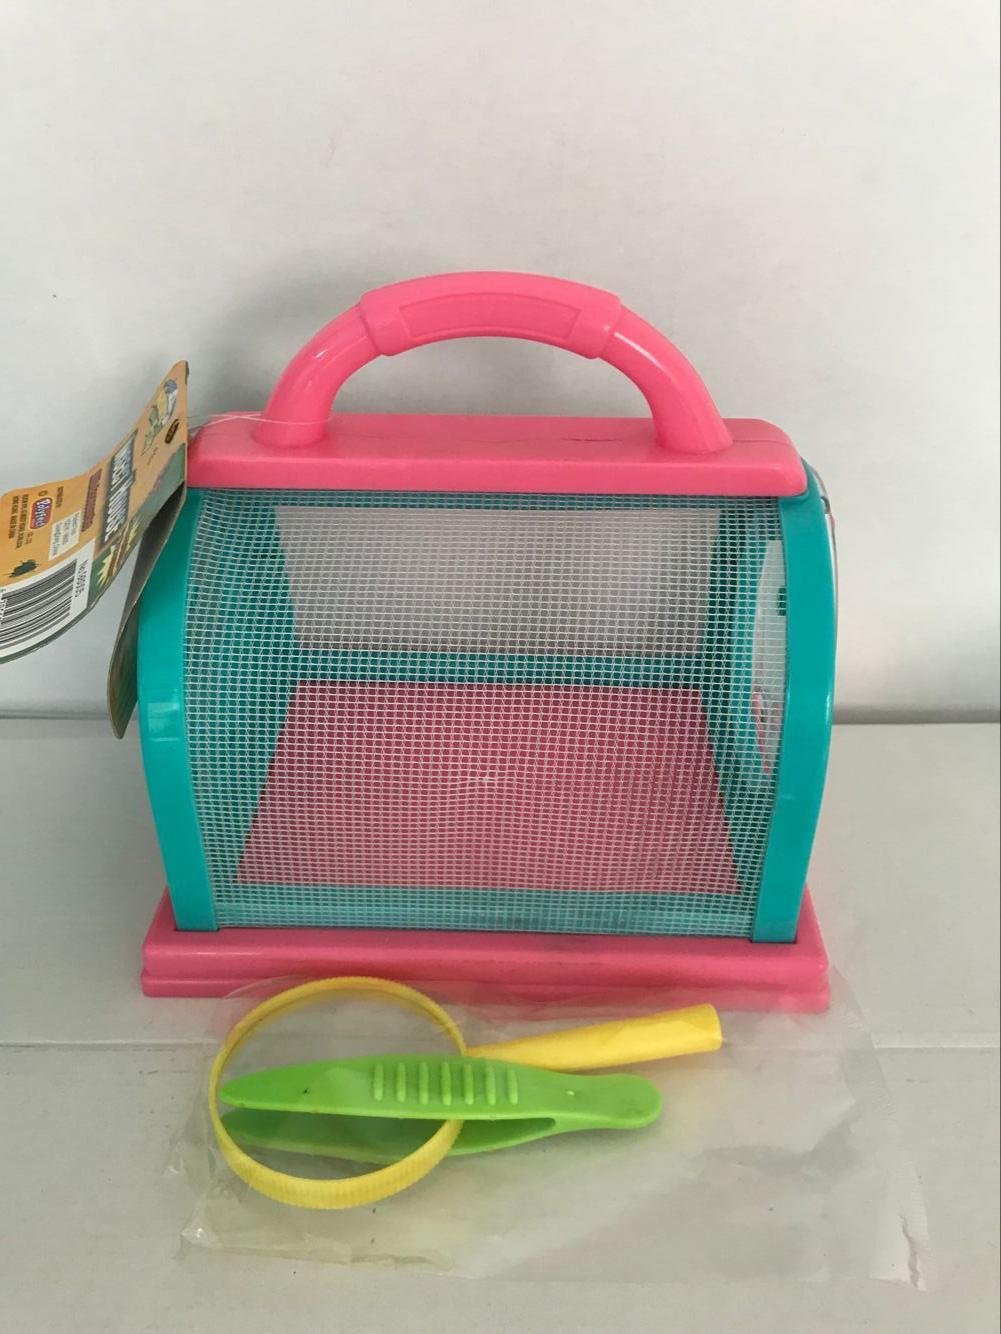 INSECT CAGE & BUG NET